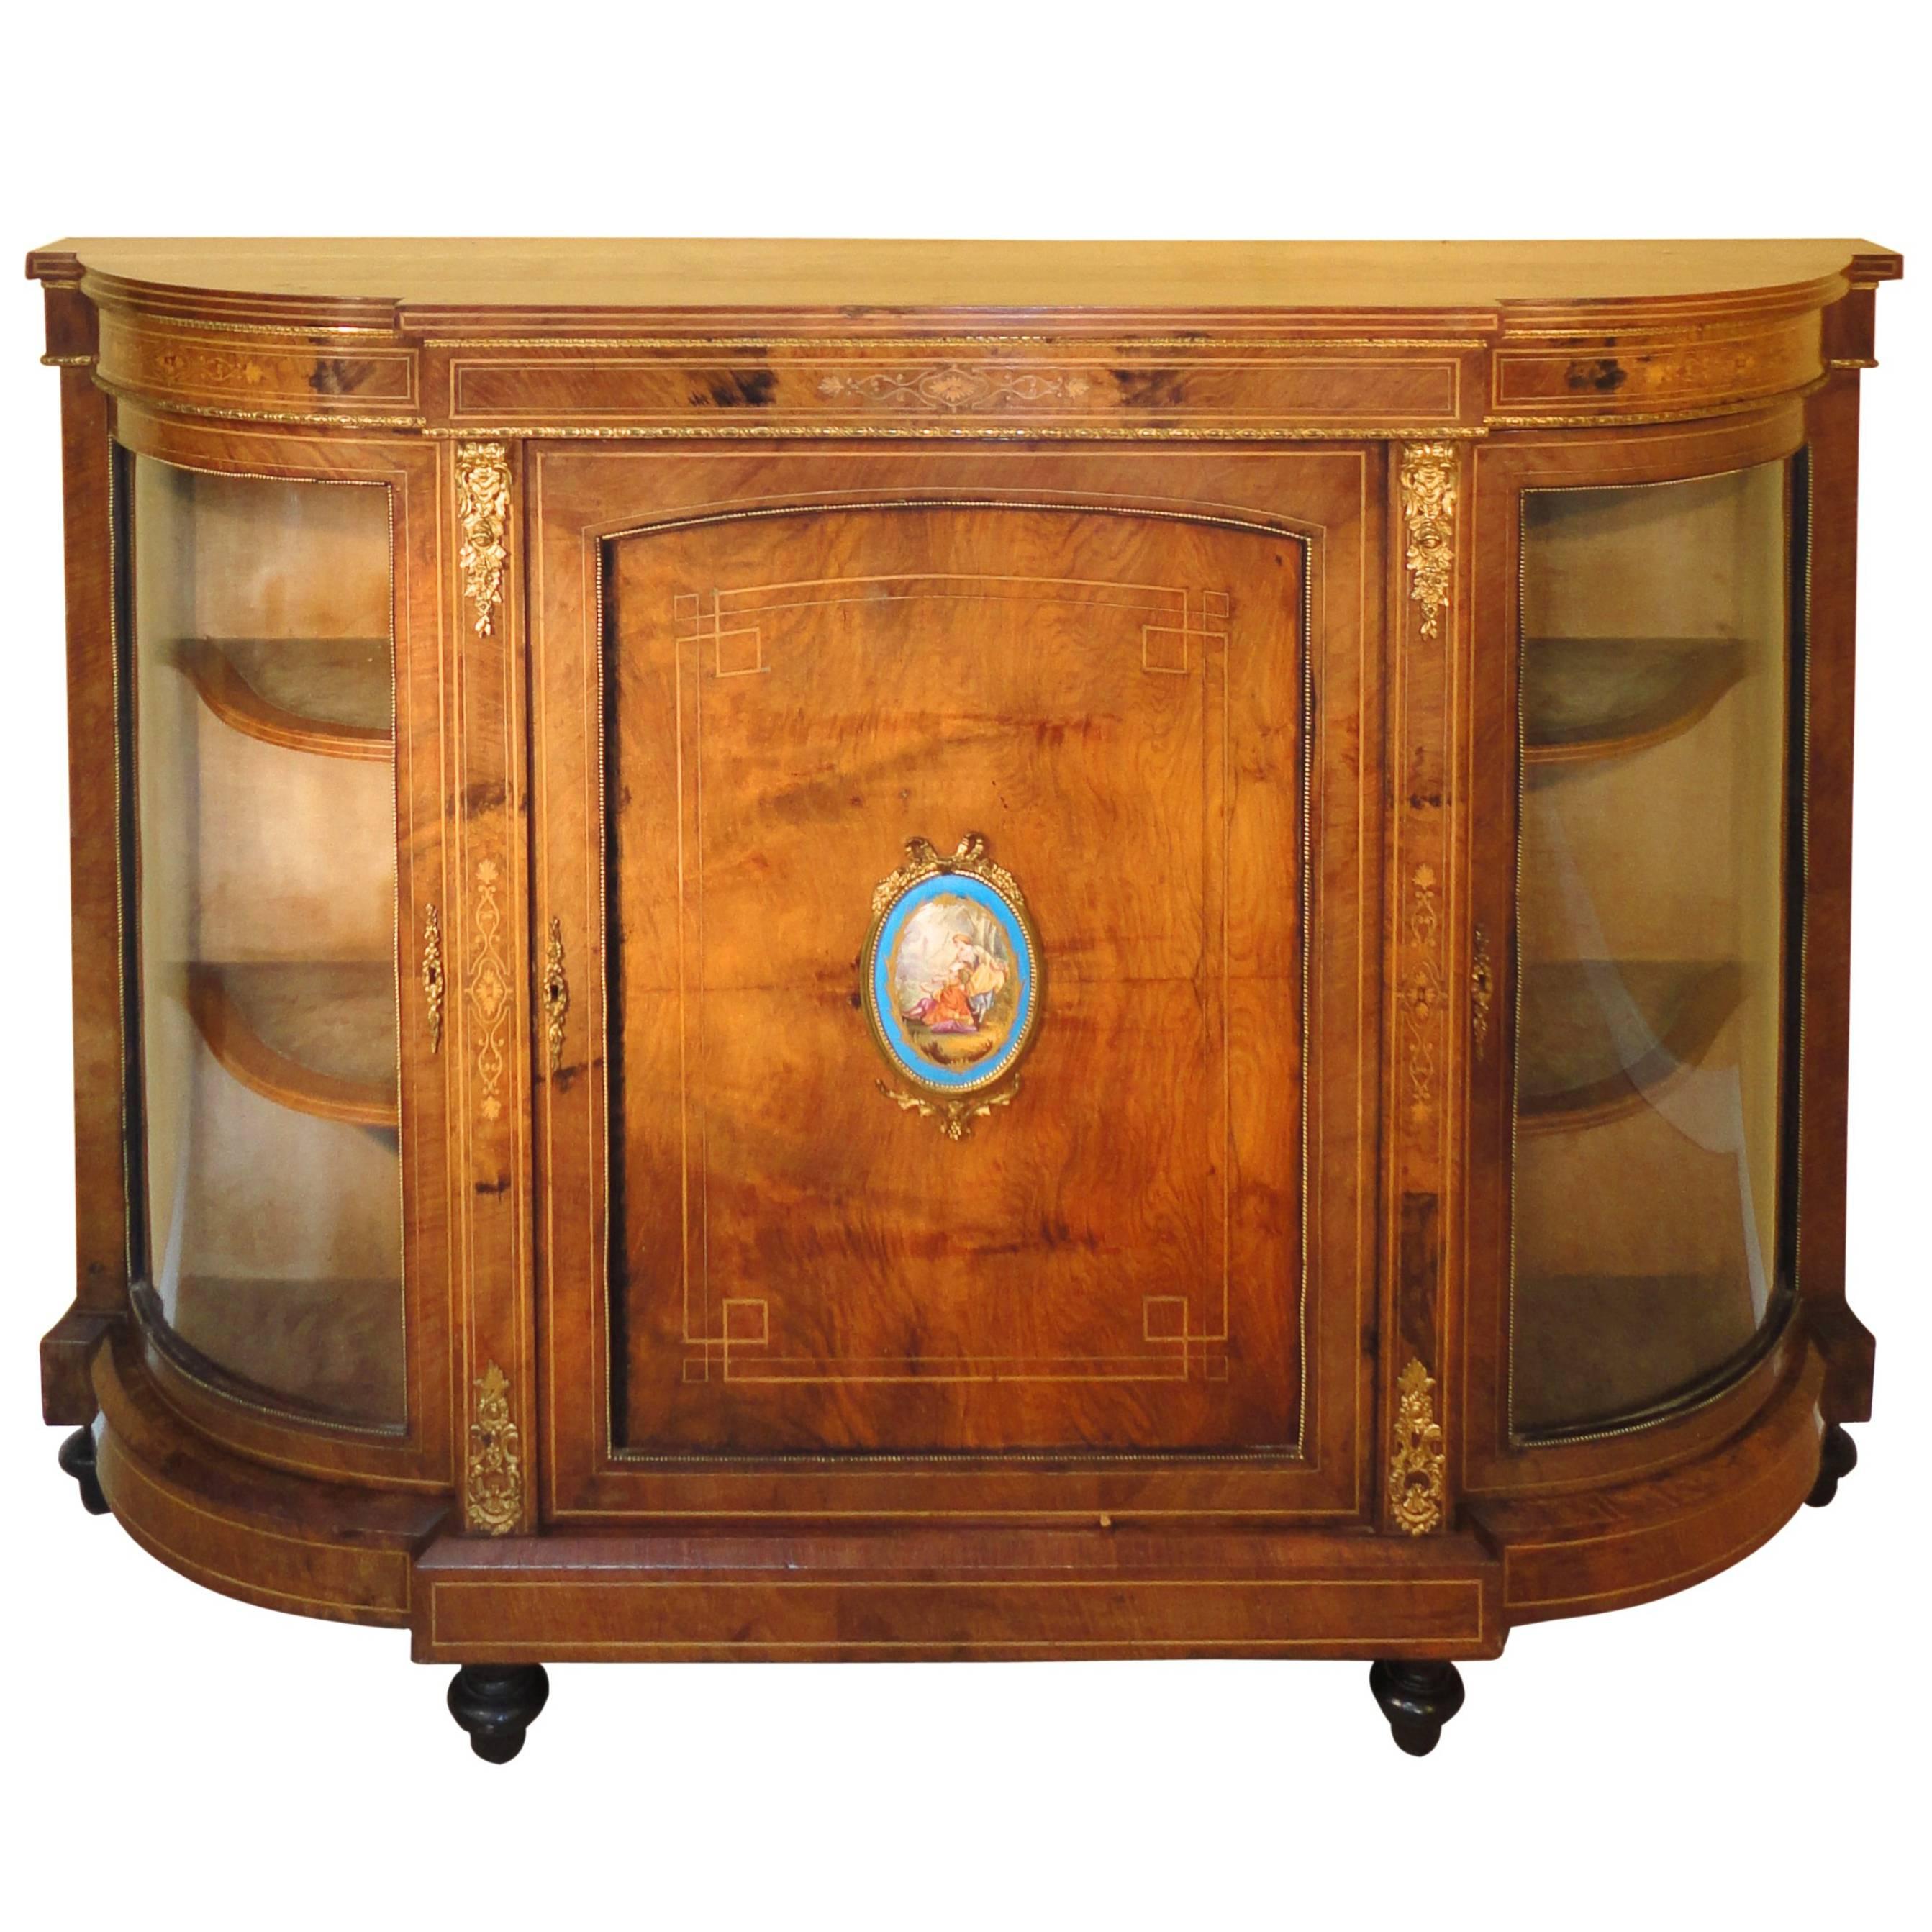 Victorian Burr Walnut and Marquetry Inlaid Credenza For Sale